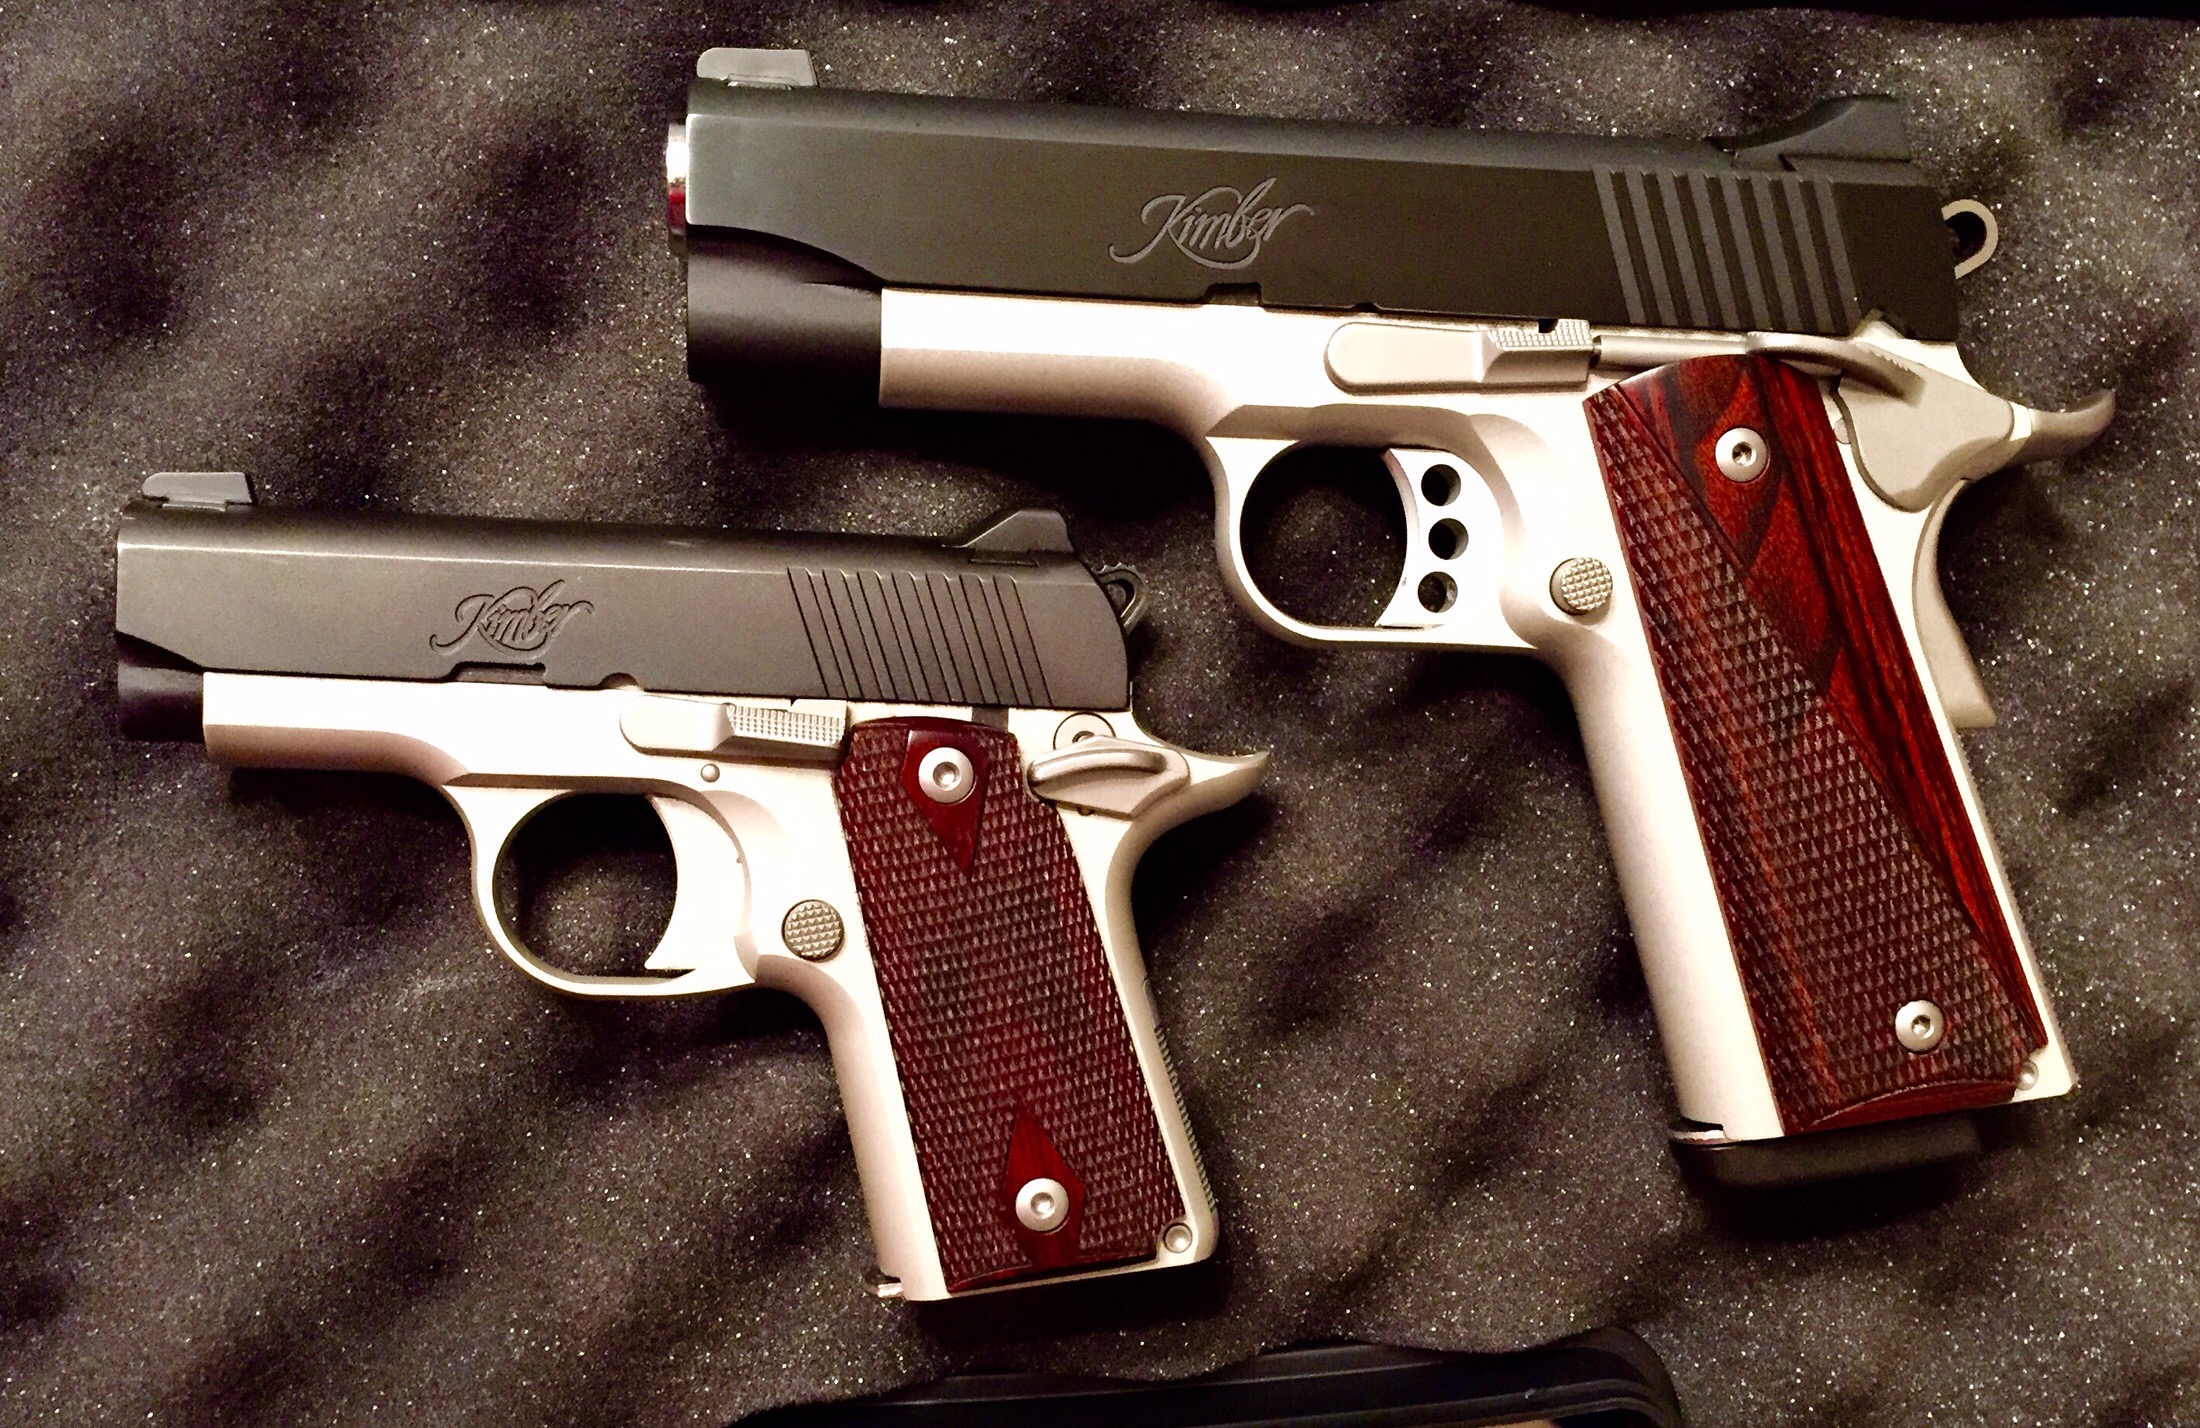 Pair of twin 1911's